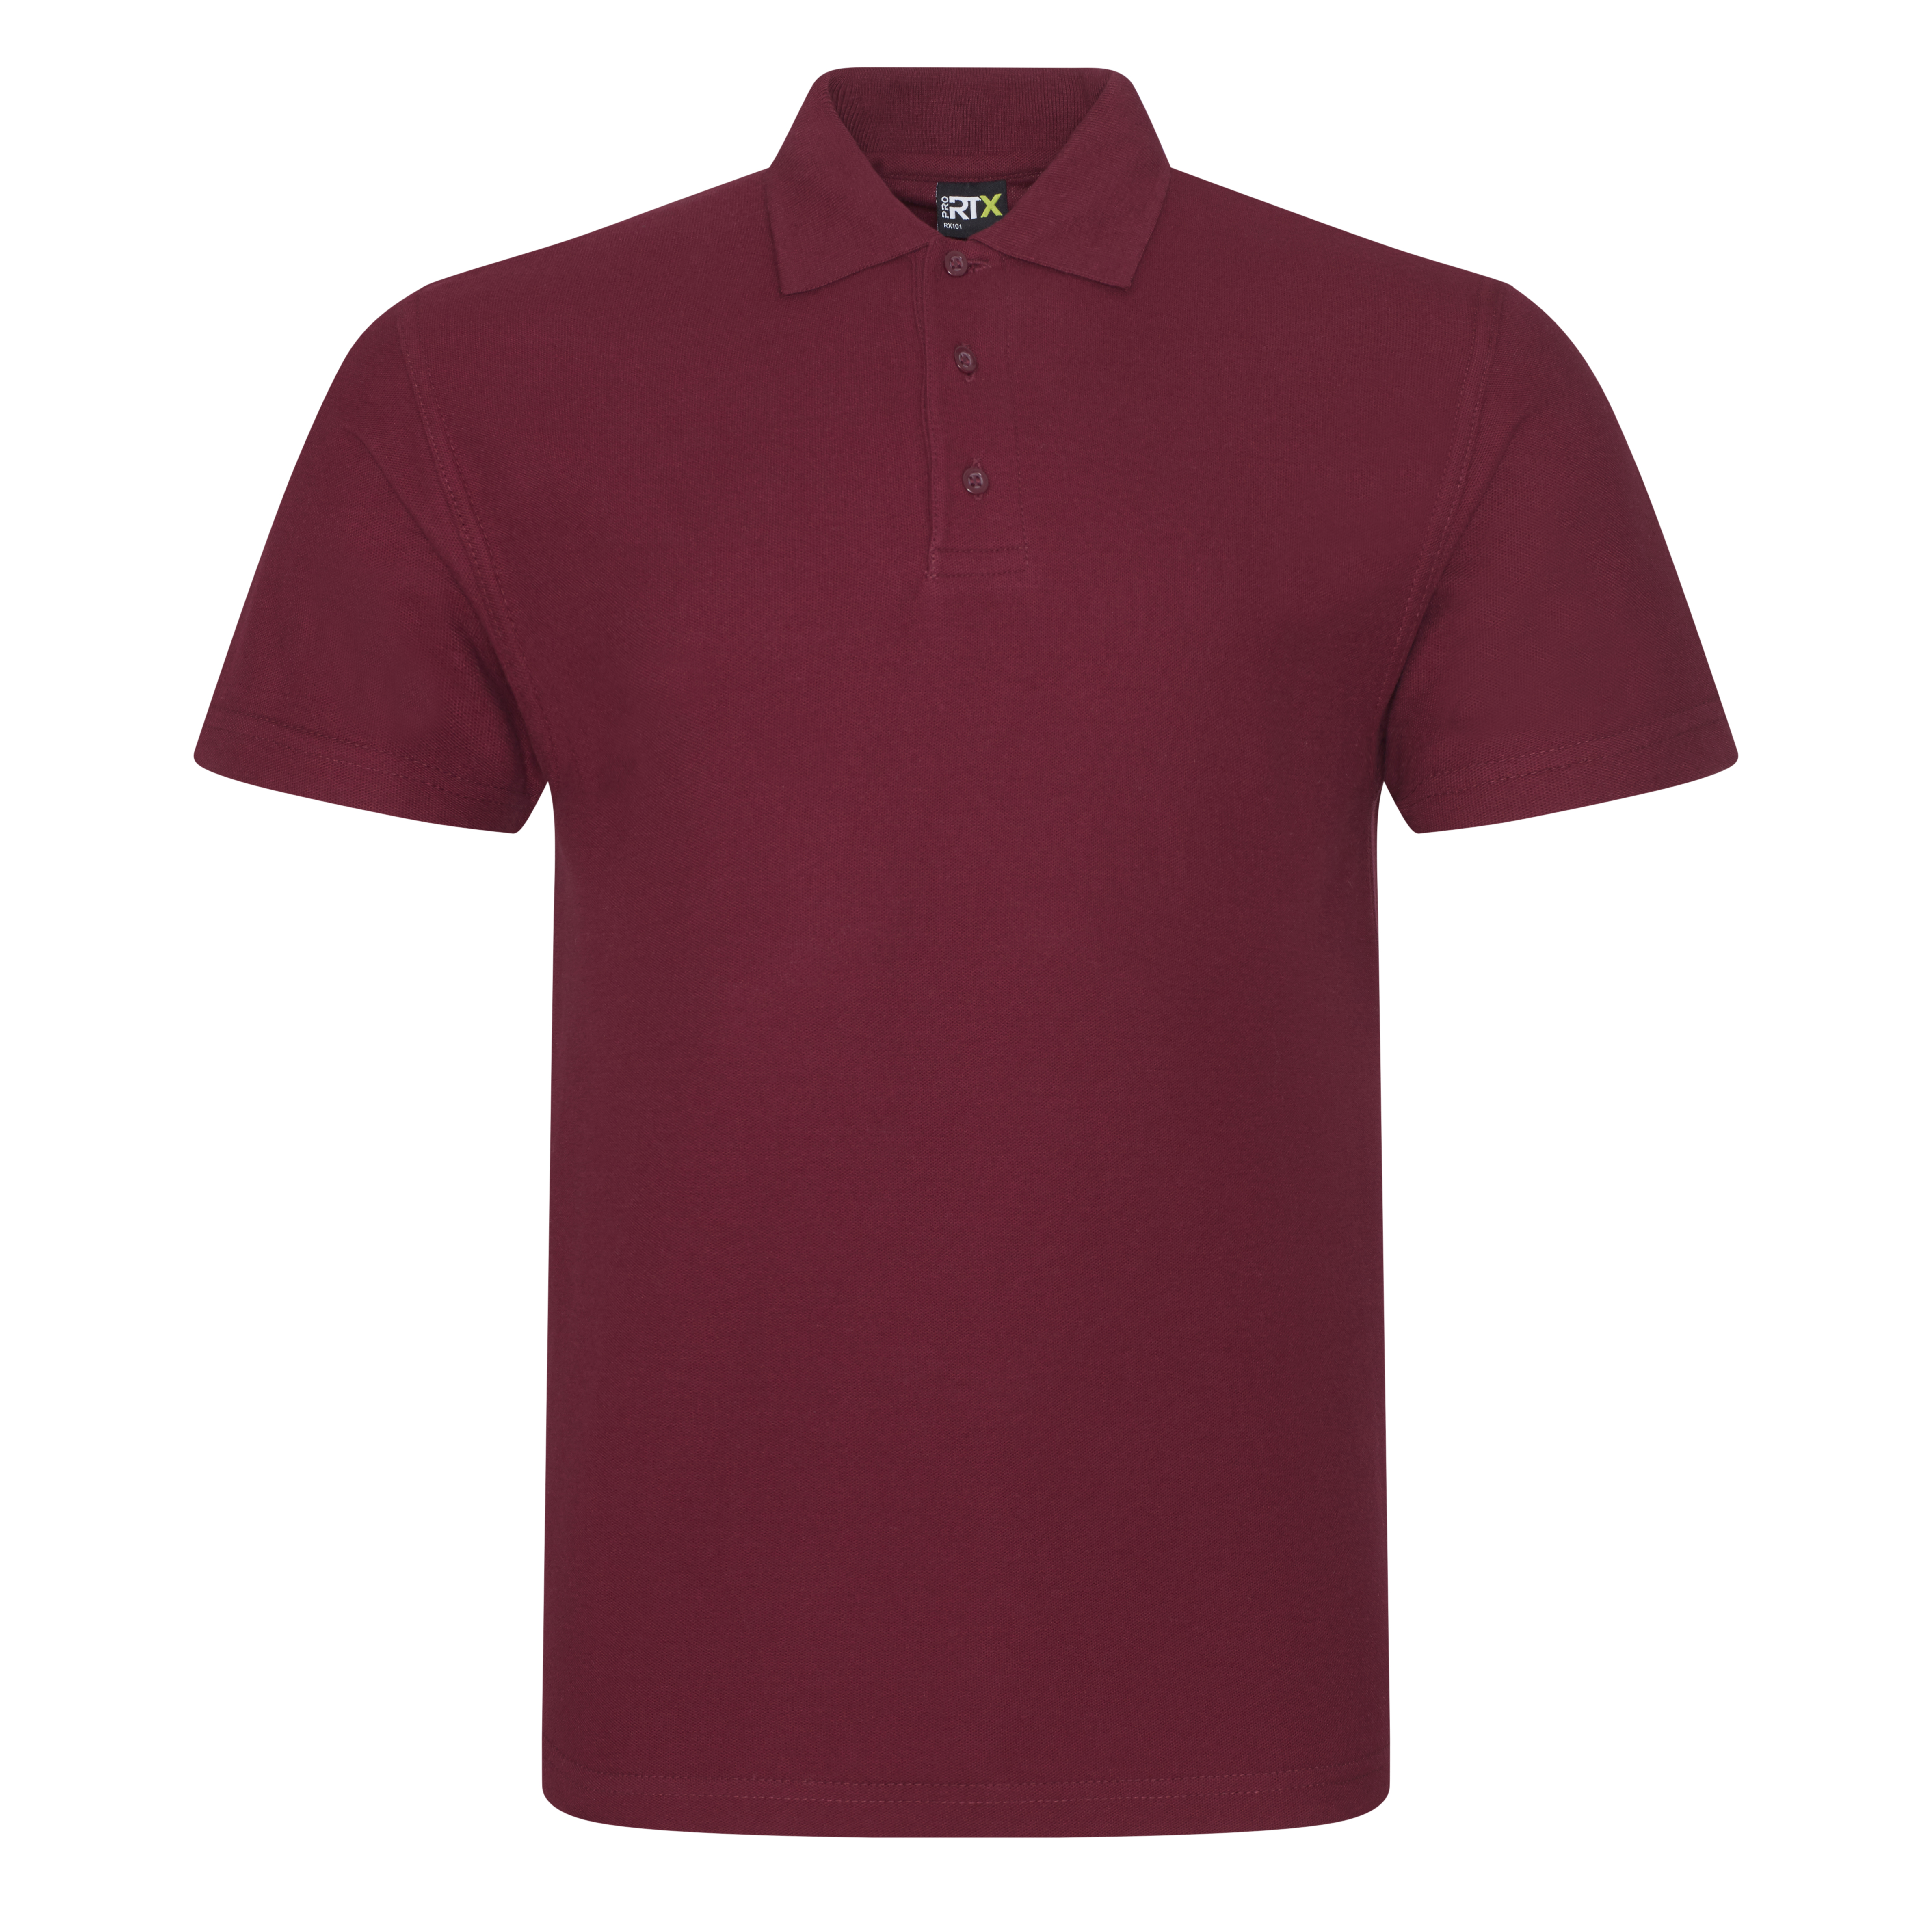 ax-httpswebsystems.s3.amazonaws.comtmp_for_downloadpro-polo-burgundy.jpg